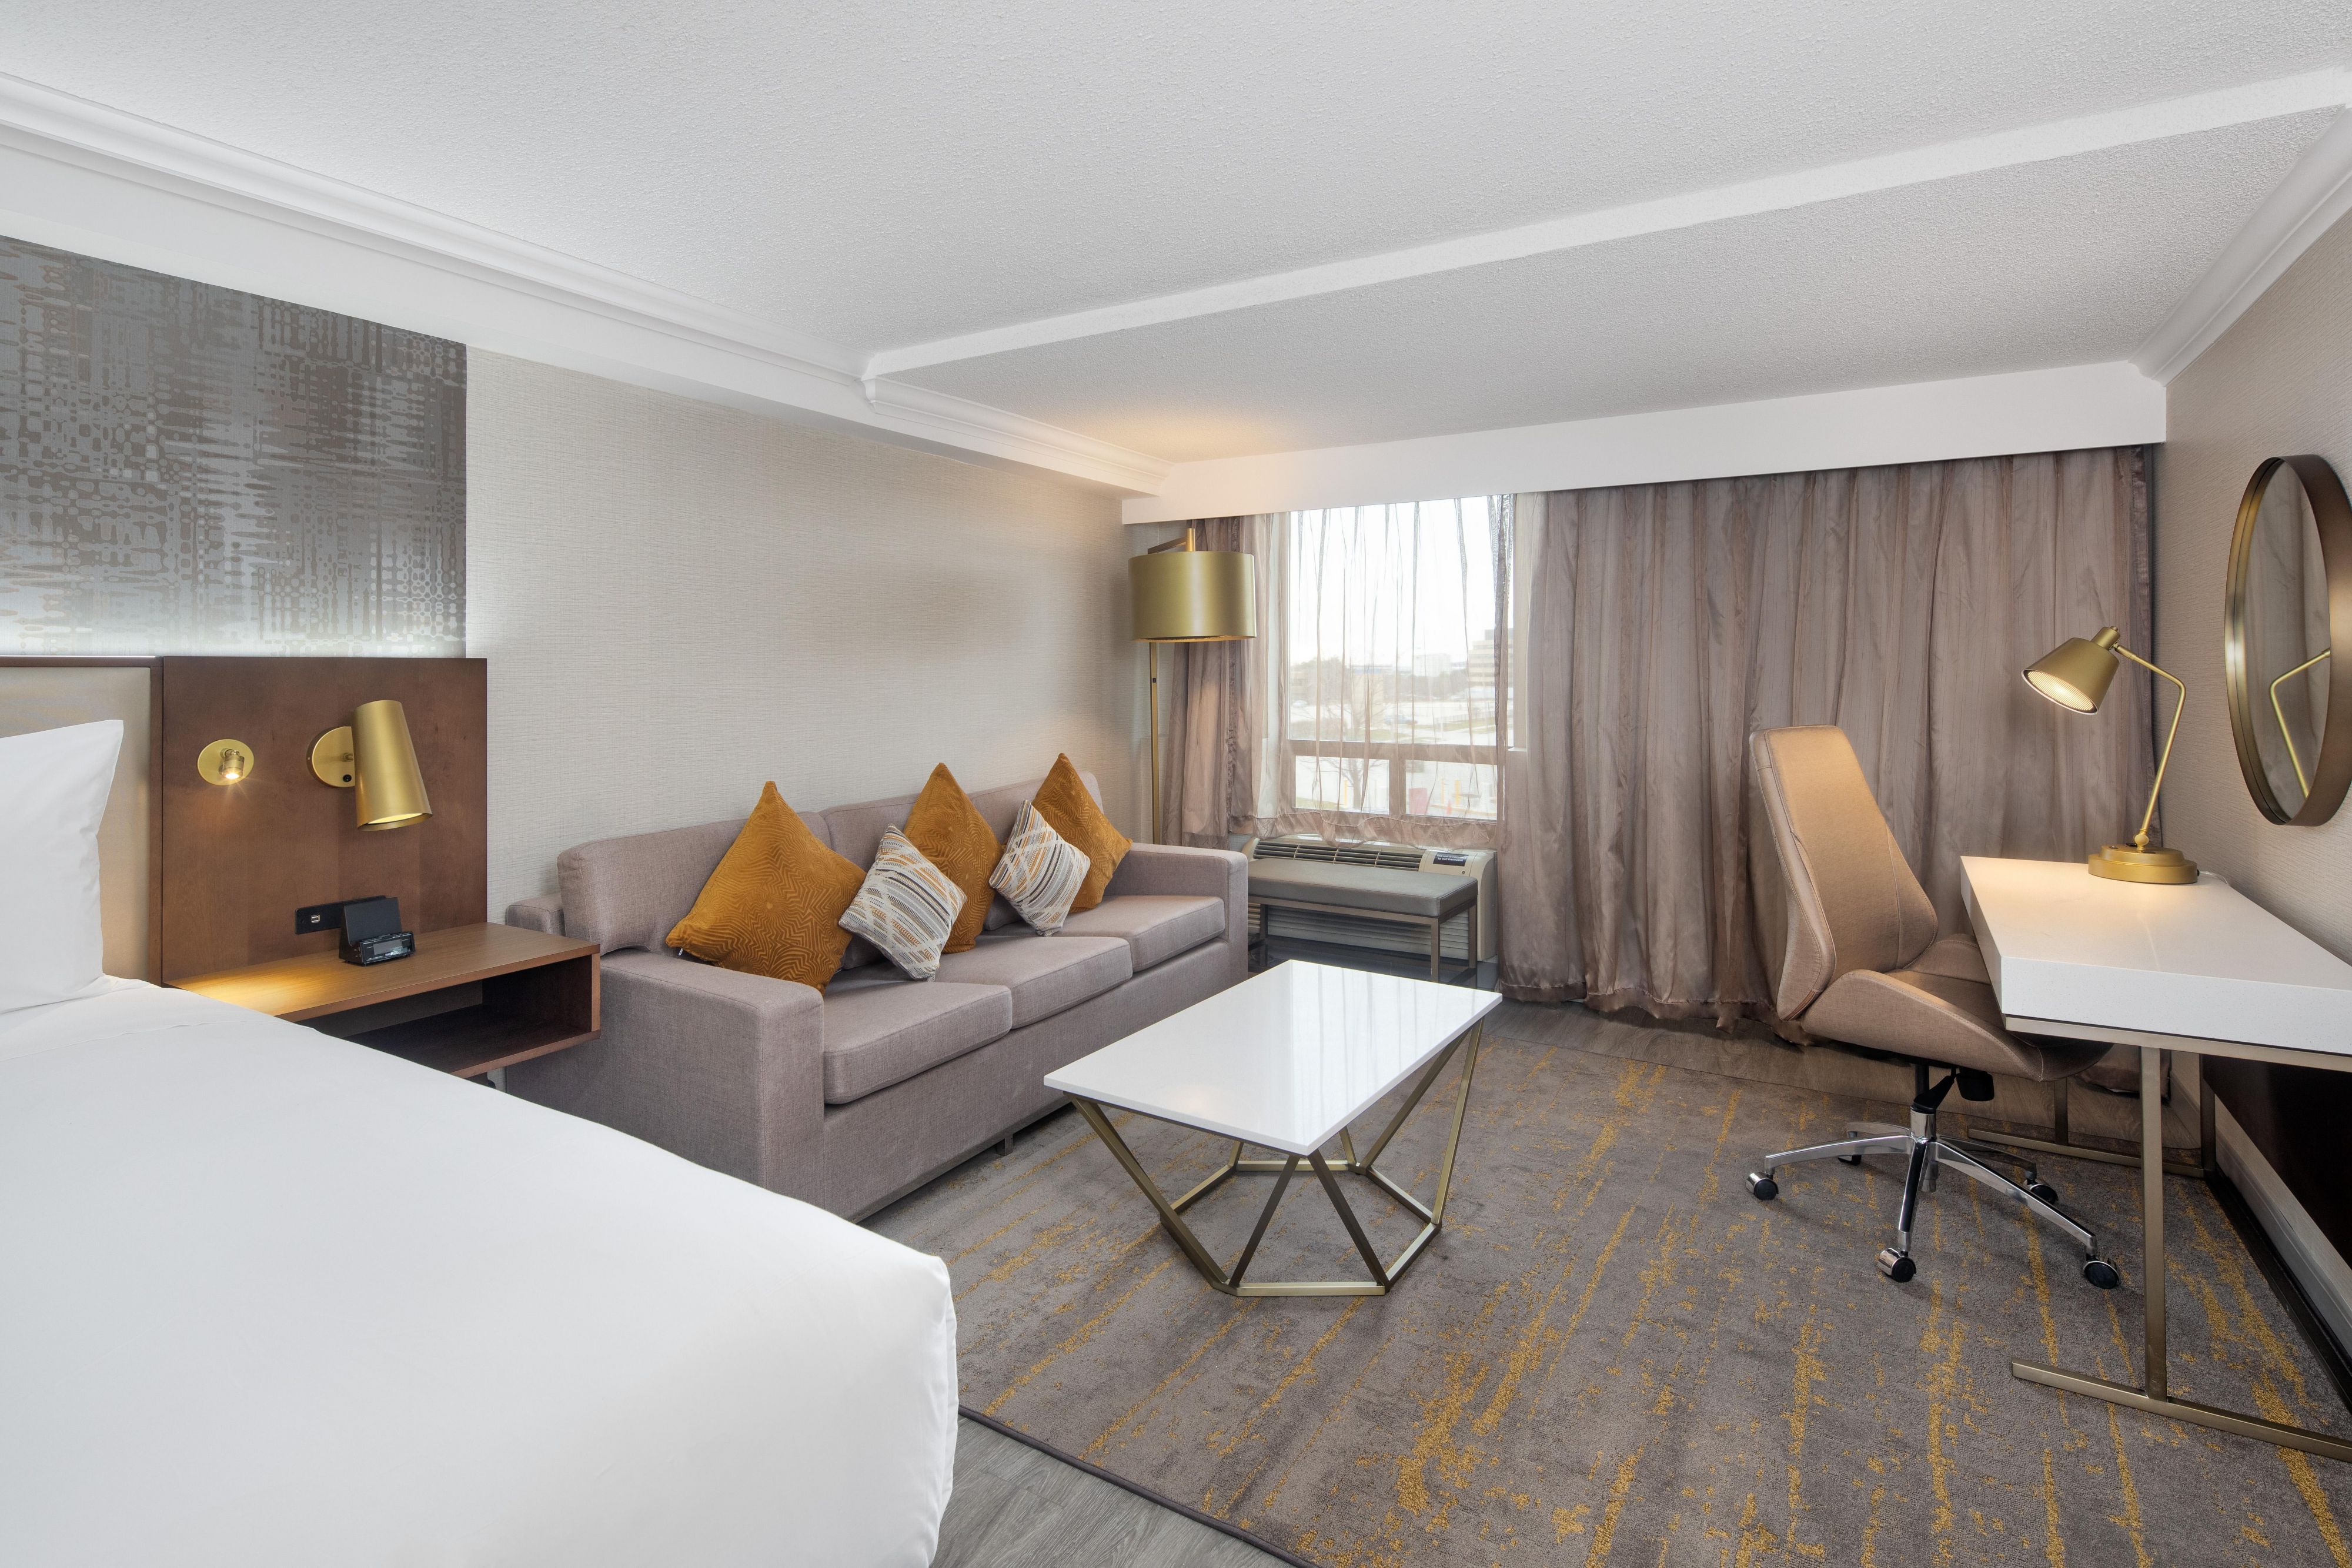 For extra space to relax, book our King Executive Room